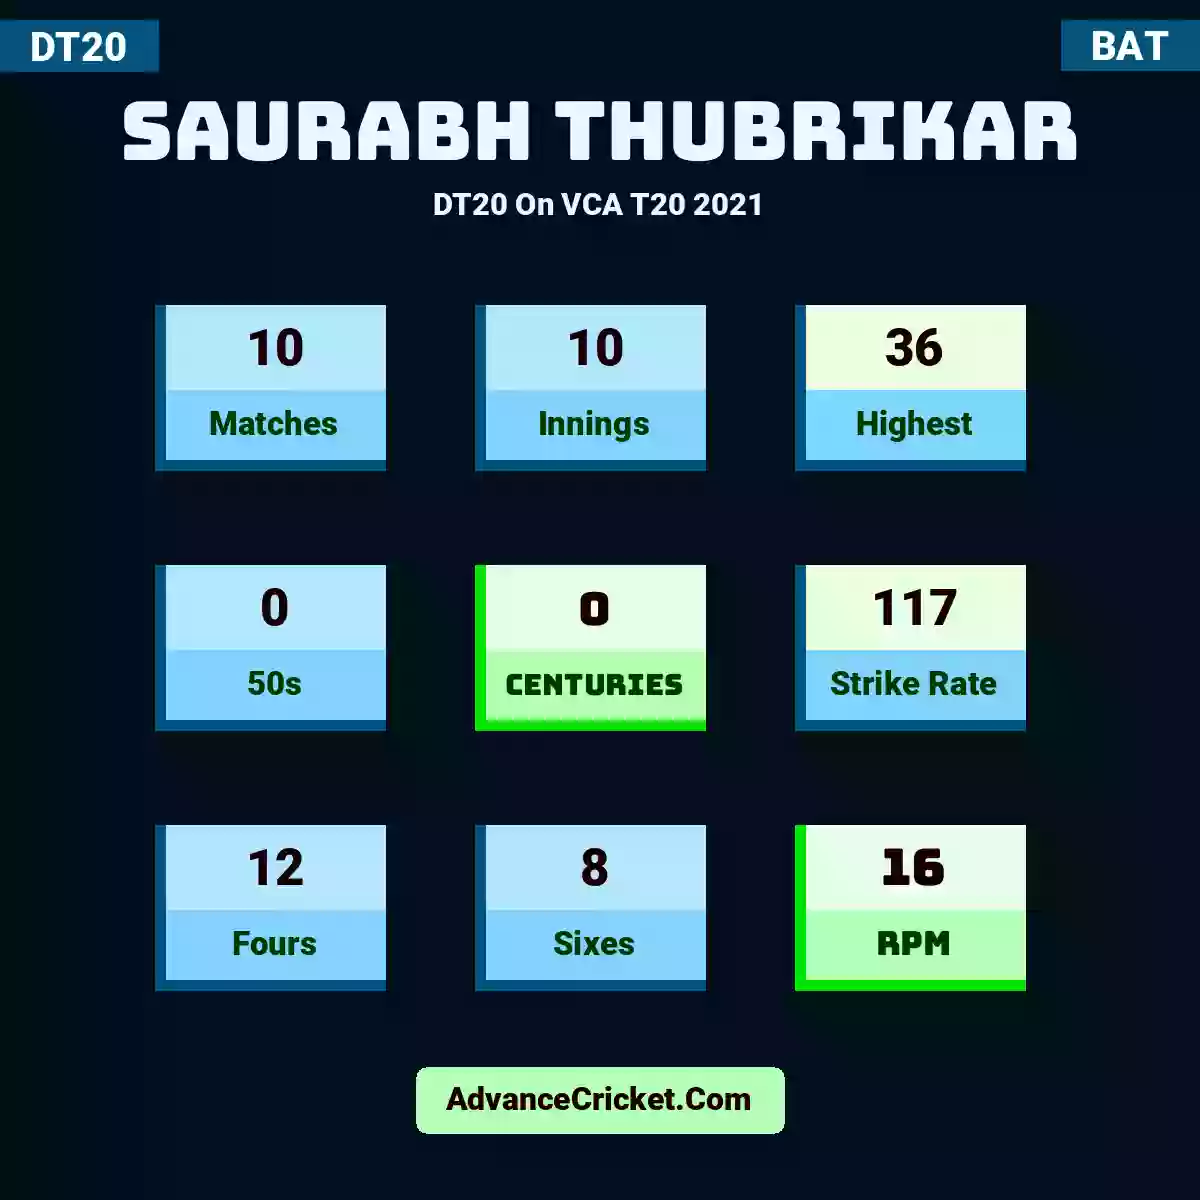 Saurabh Thubrikar DT20  On VCA T20 2021, Saurabh Thubrikar played 10 matches, scored 36 runs as highest, 0 half-centuries, and 0 centuries, with a strike rate of 117. S.Thubrikar hit 12 fours and 8 sixes, with an RPM of 16.